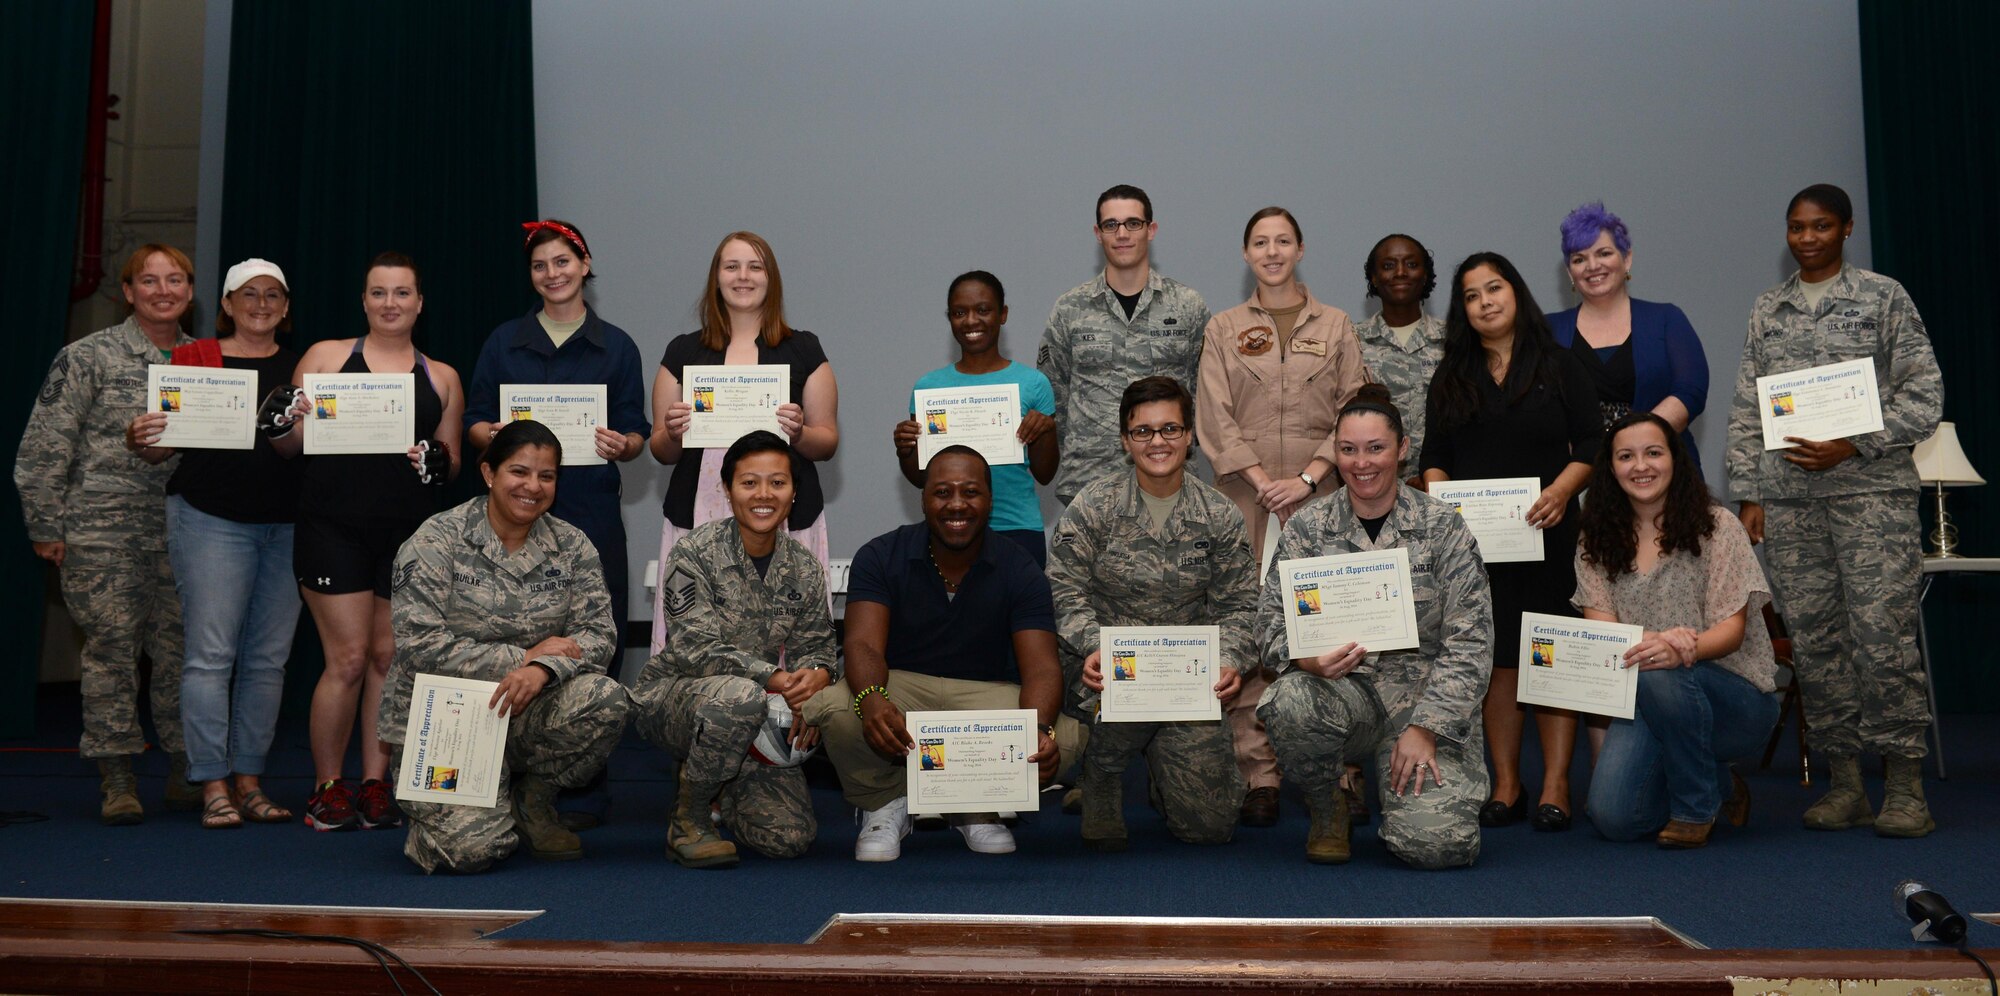 Participants for the Women’s Equality Day event stand for a group photo Aug. 26, 2016, at Andersen Air Force Base, Guam. This marked the 3rd annual event held at Andersen to celebrate women’s right to vote.  (U.S. Air Force photo by Airman 1st Class Arielle Vasquez/Released)